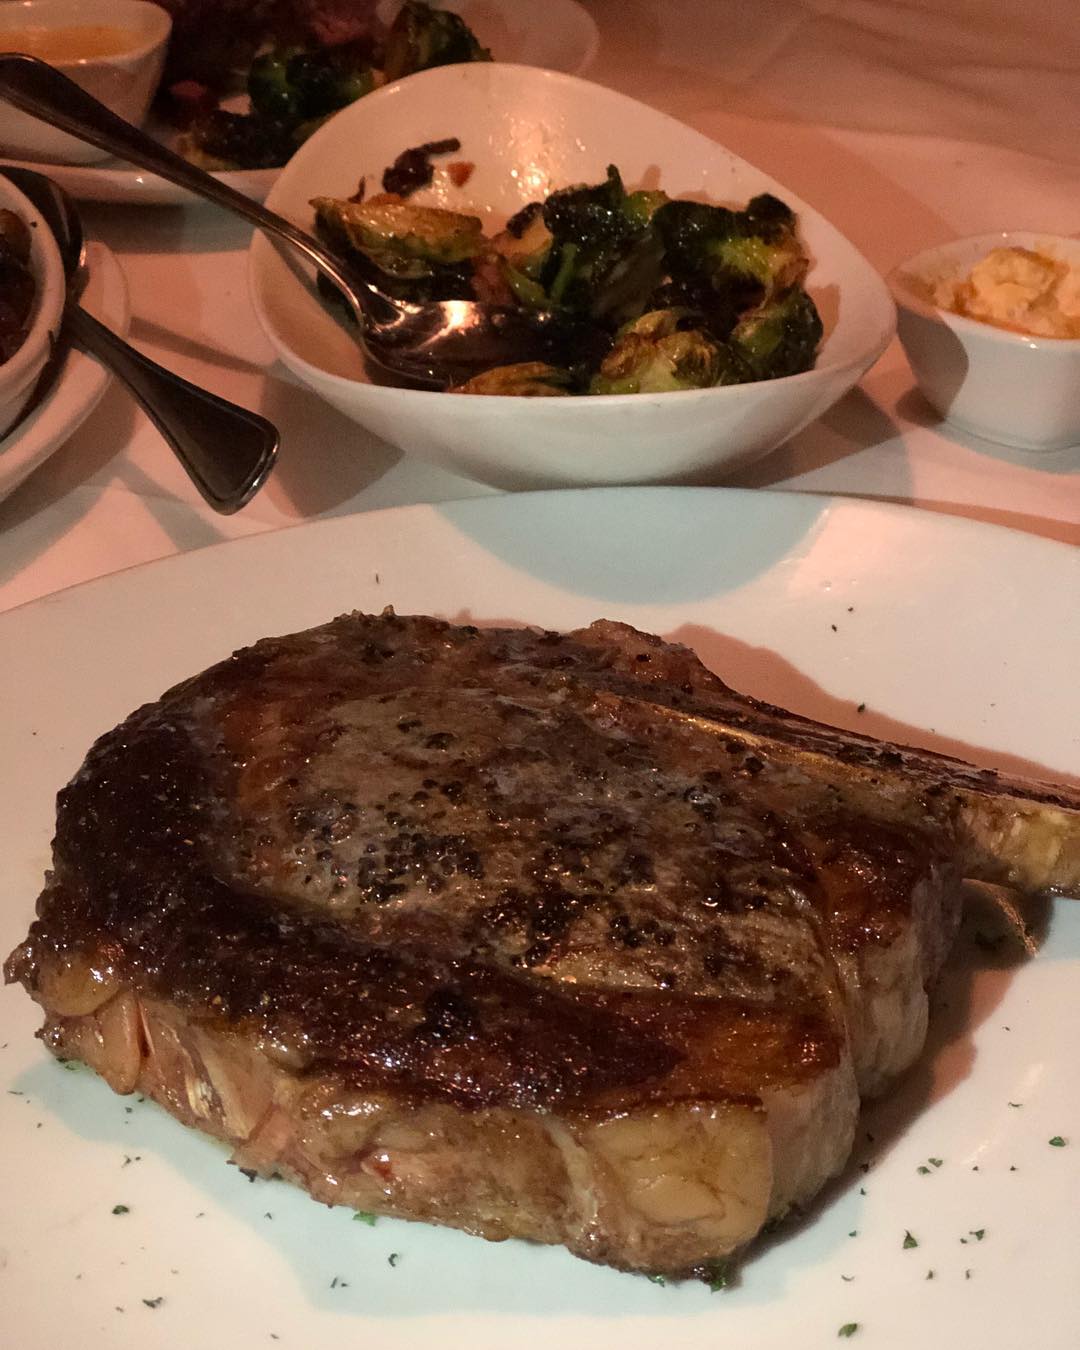 Sorry it’s not an excellent picture but this is one of my favorite reasons keto is so awesome… Rare Ribeye and Brussels sprouts with bacon for dinner last night